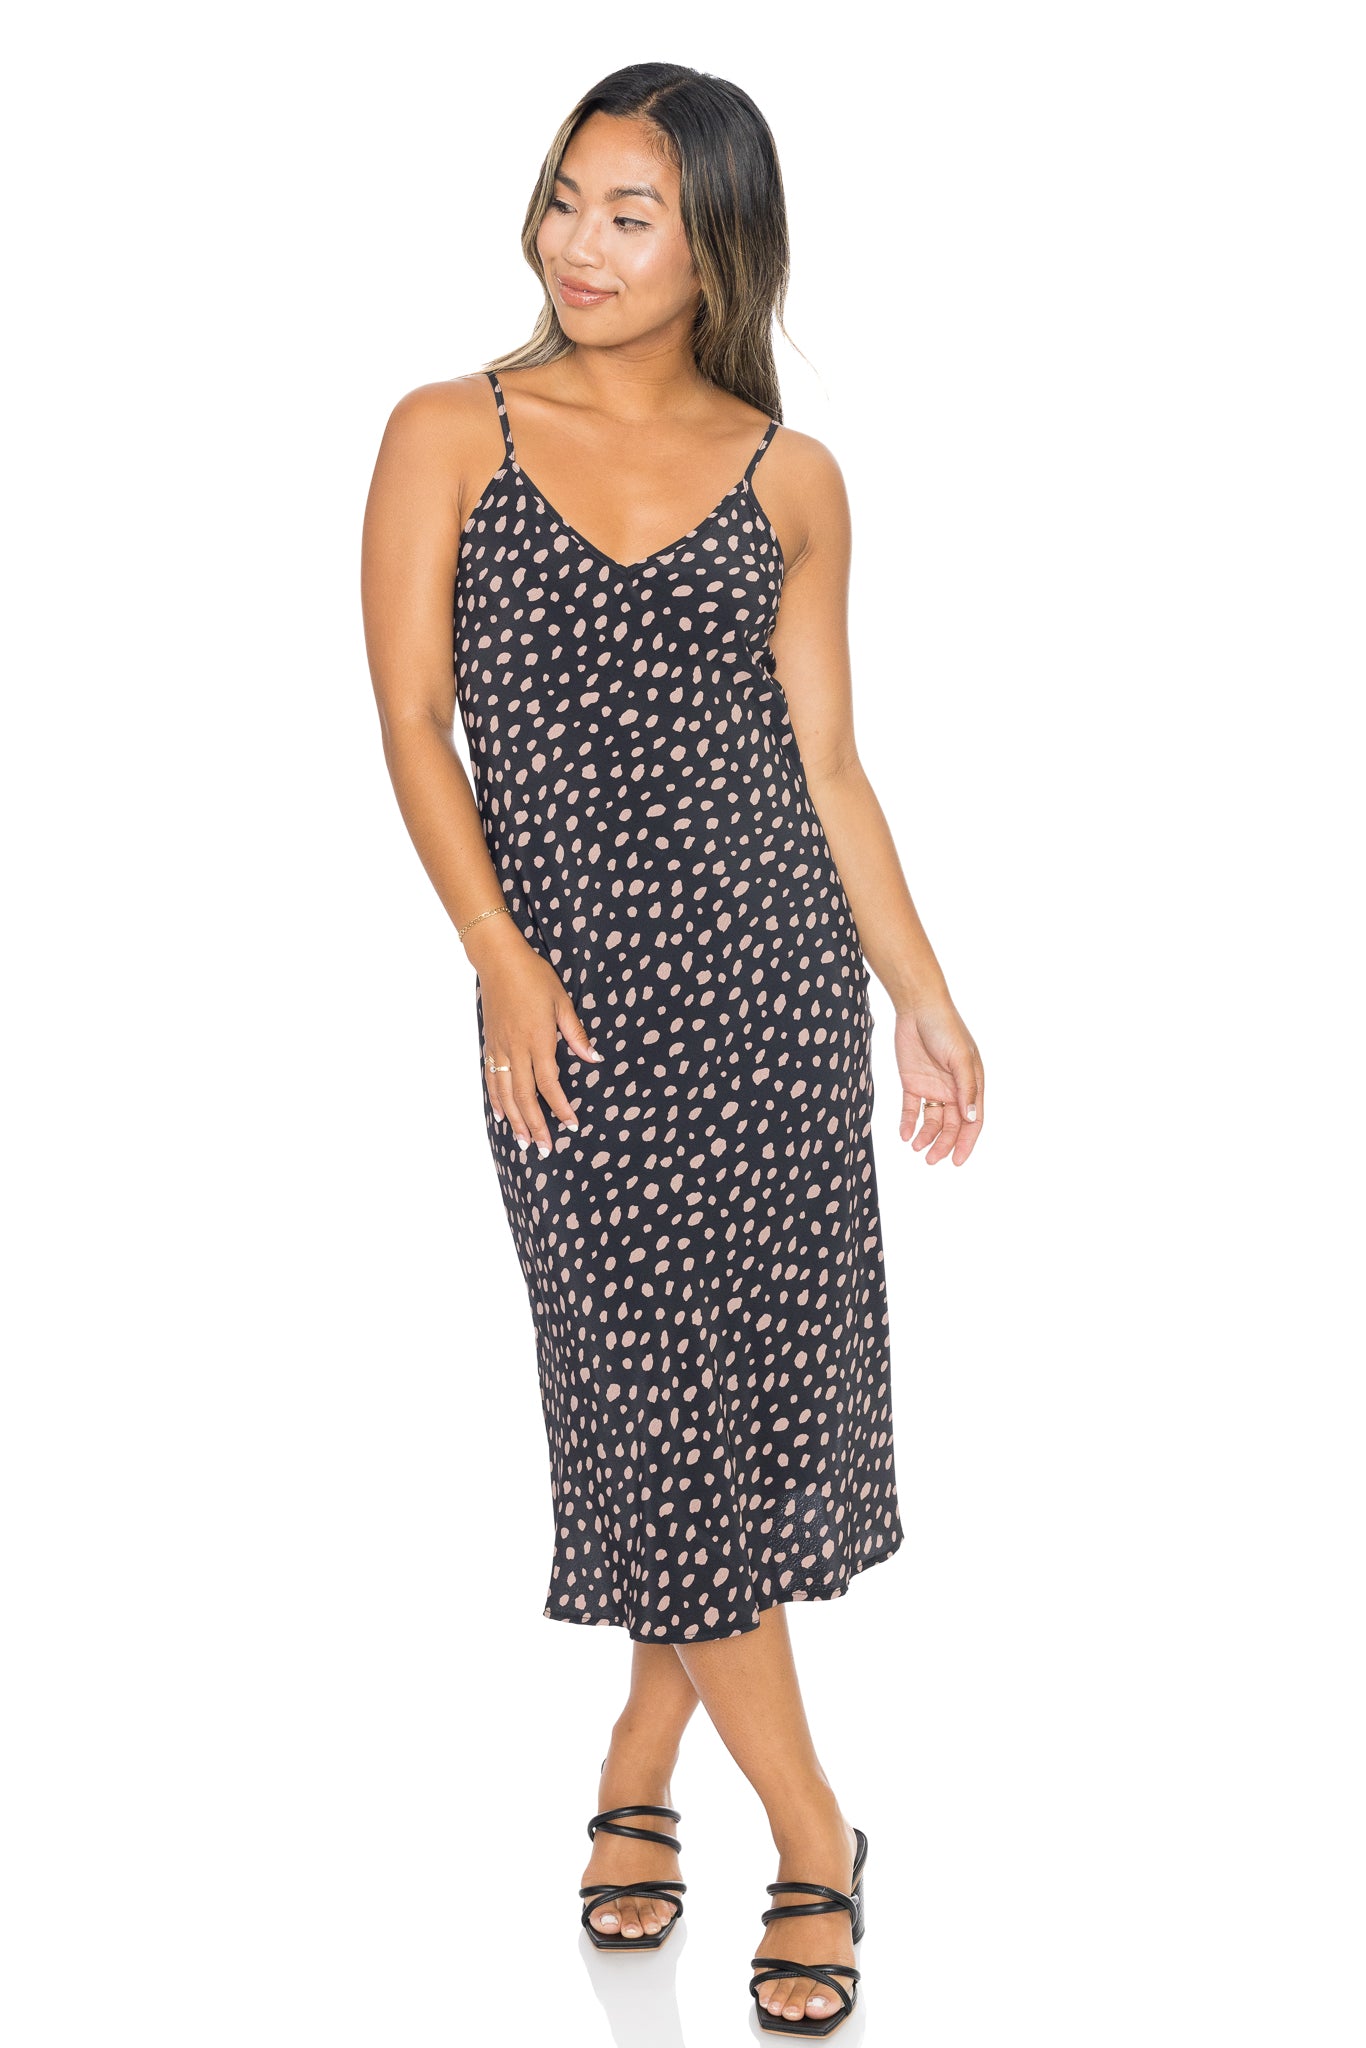 Avery Midi Dress by Common Collection